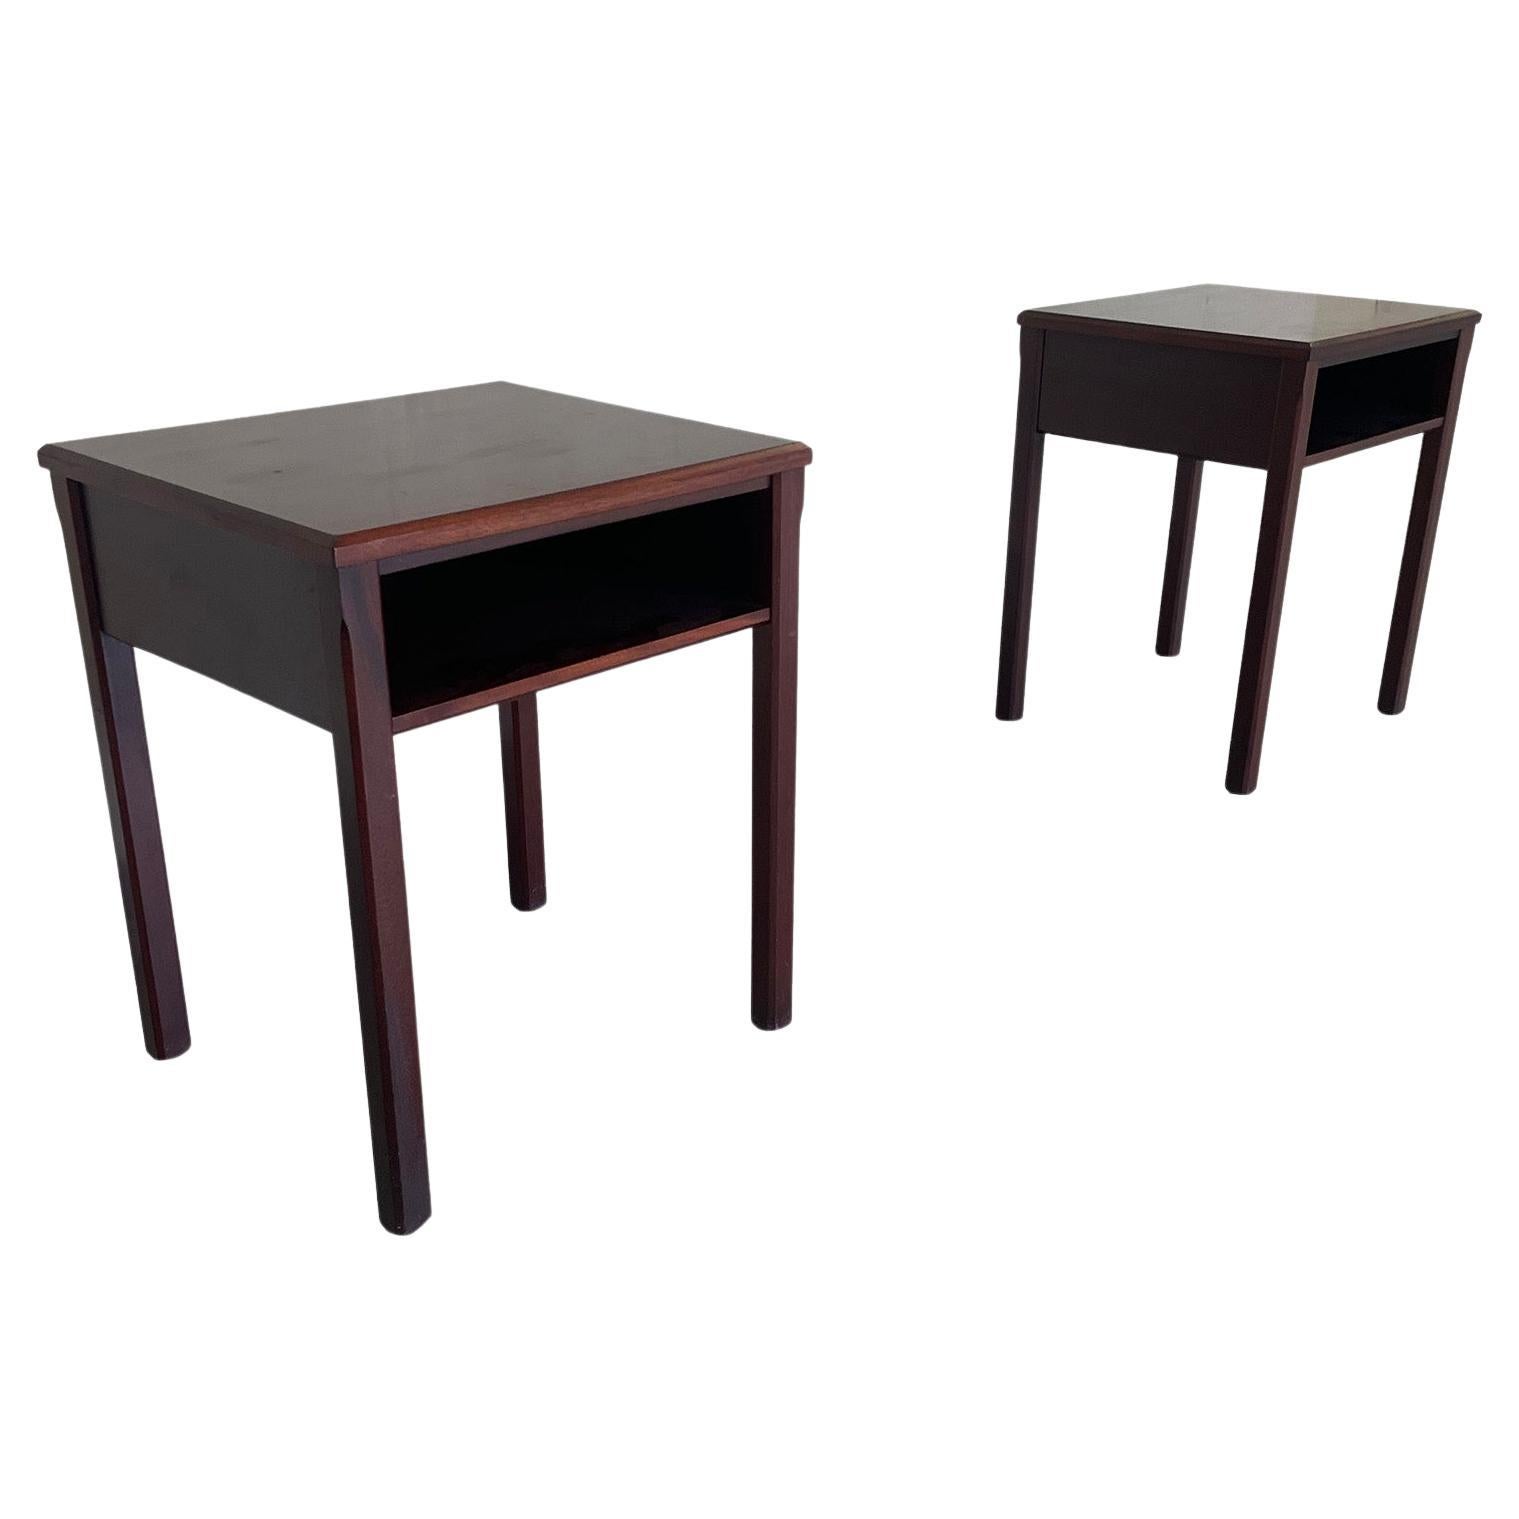 Pair of 1950s Danish Modern Mahogany Nightstands by Lysberg Hansen and Therp For Sale